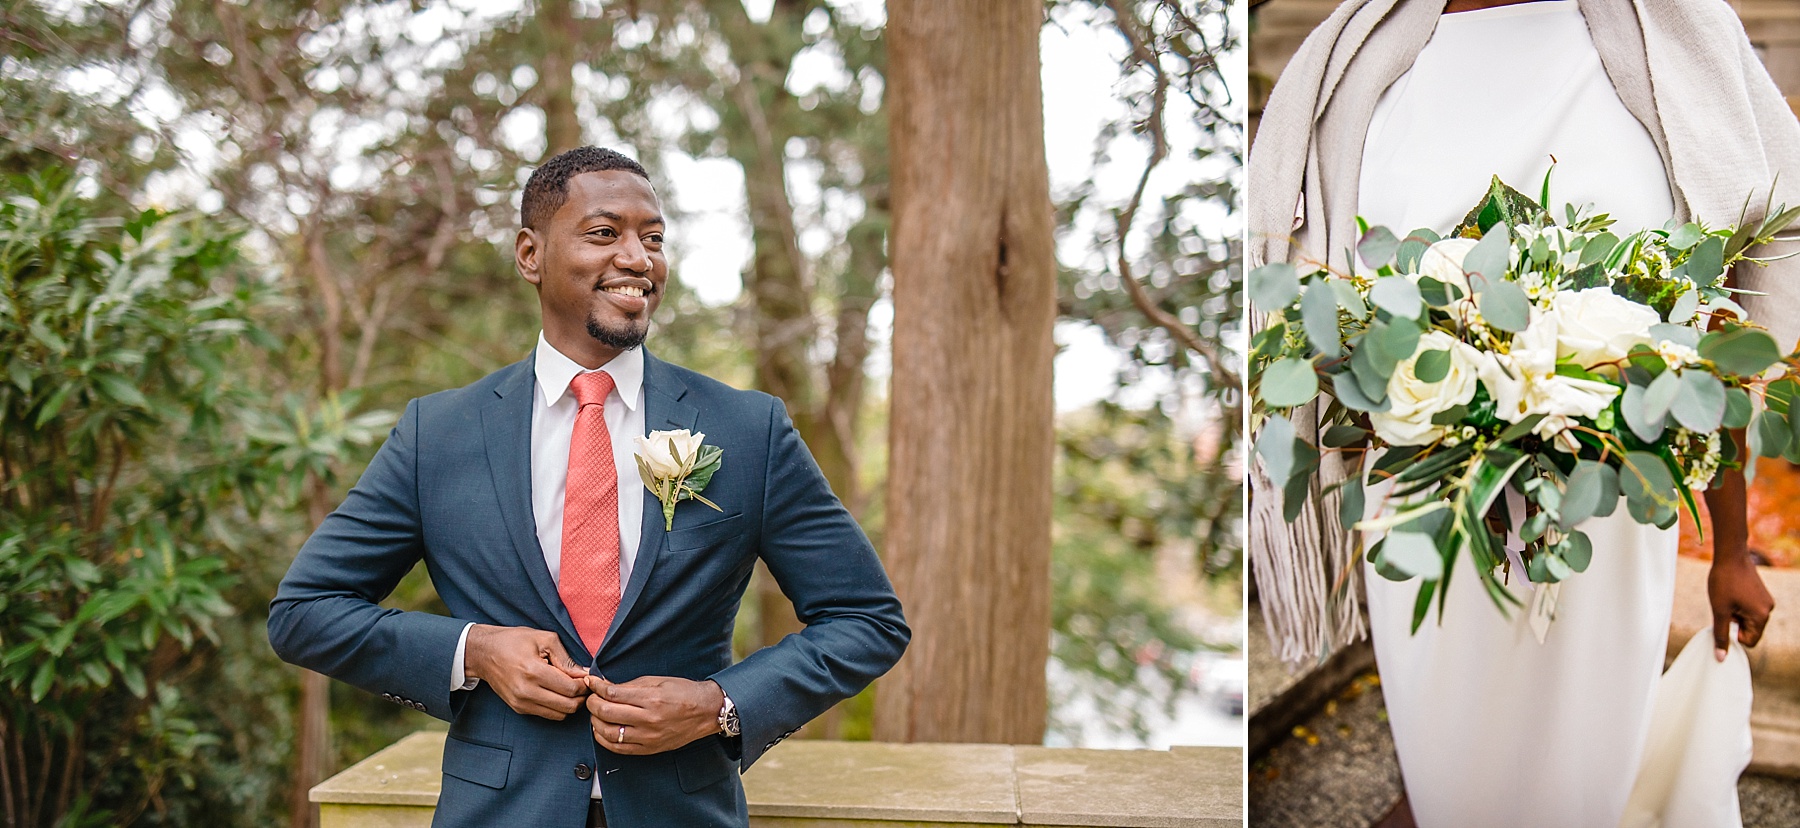 bride and groom details on DC elopement photographed by Damien Carter Photography